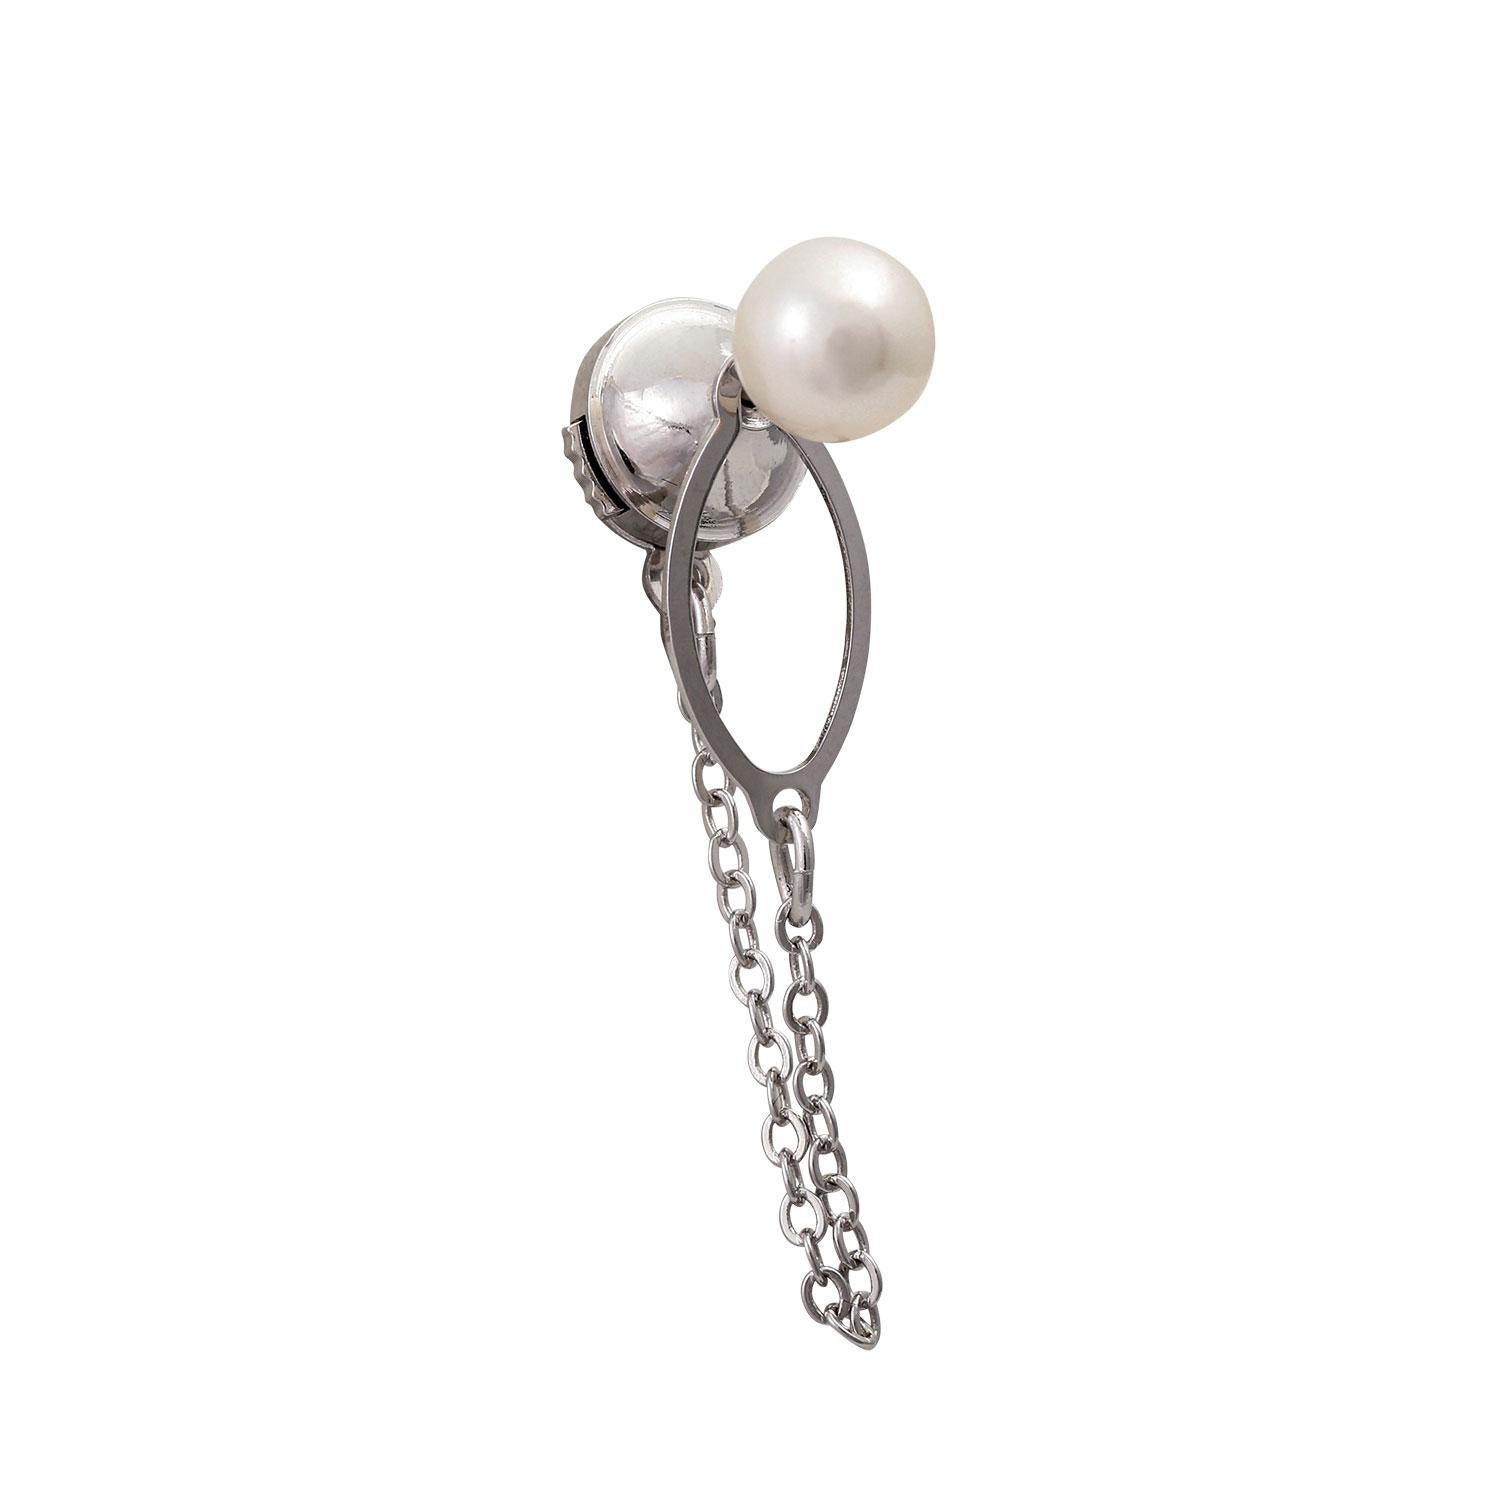 Stick pin set with a cultured pearl. WG 14K.
